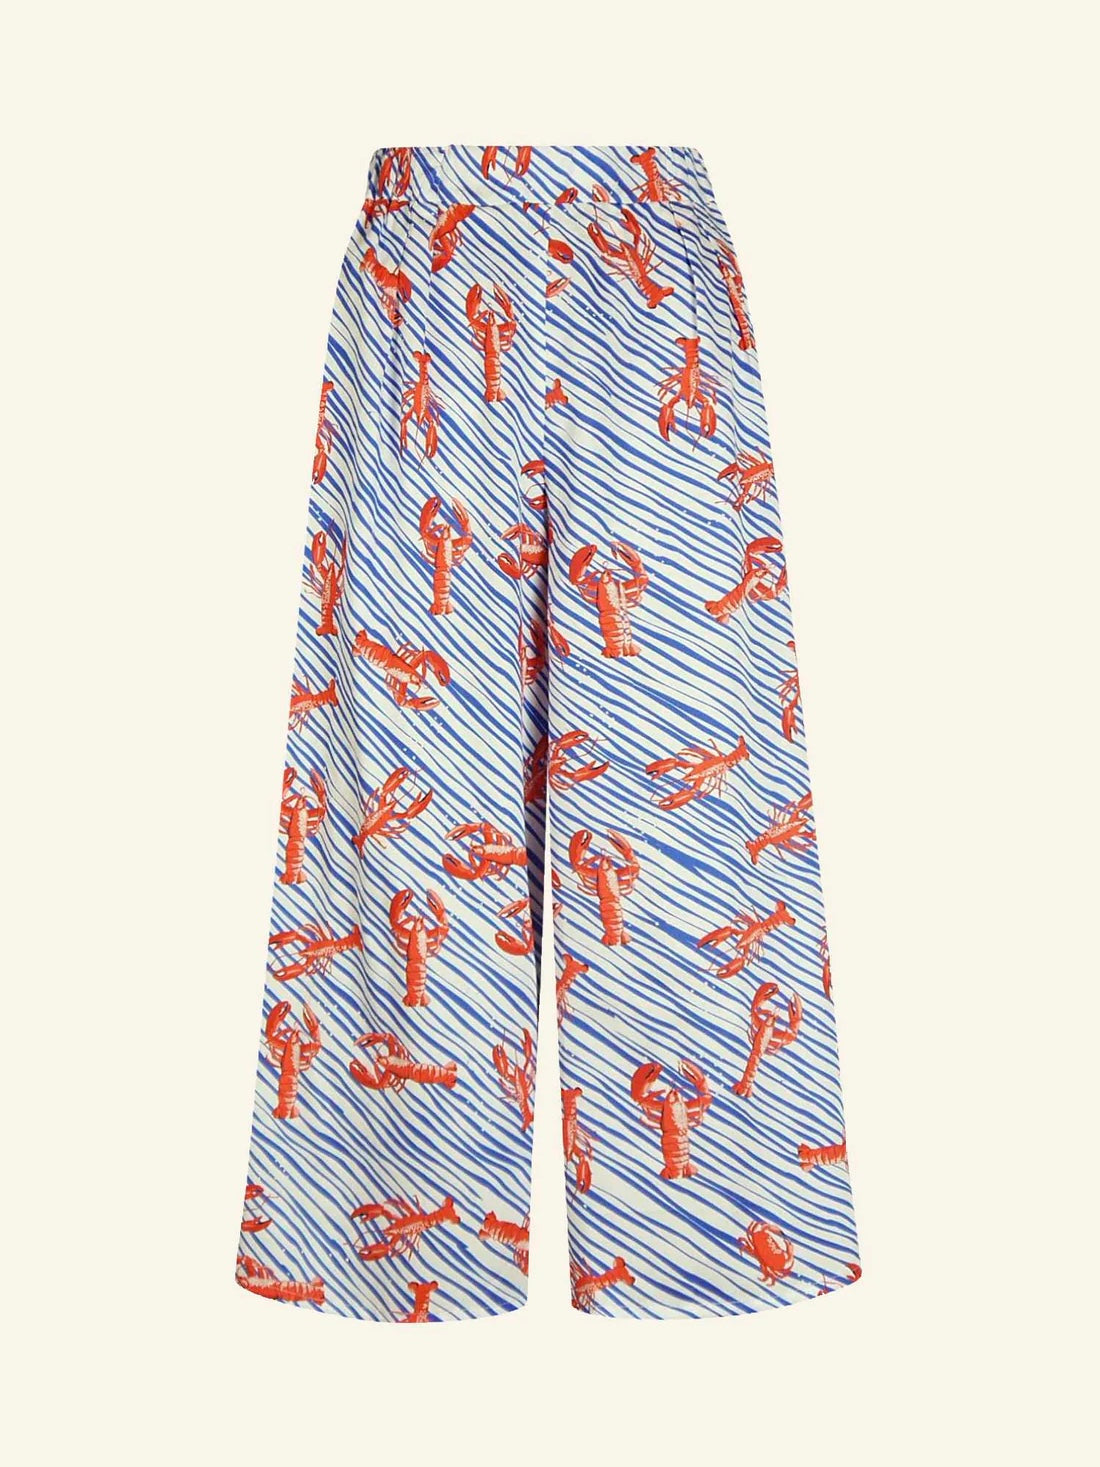 Palava Edith Ivory Lobster Trousers